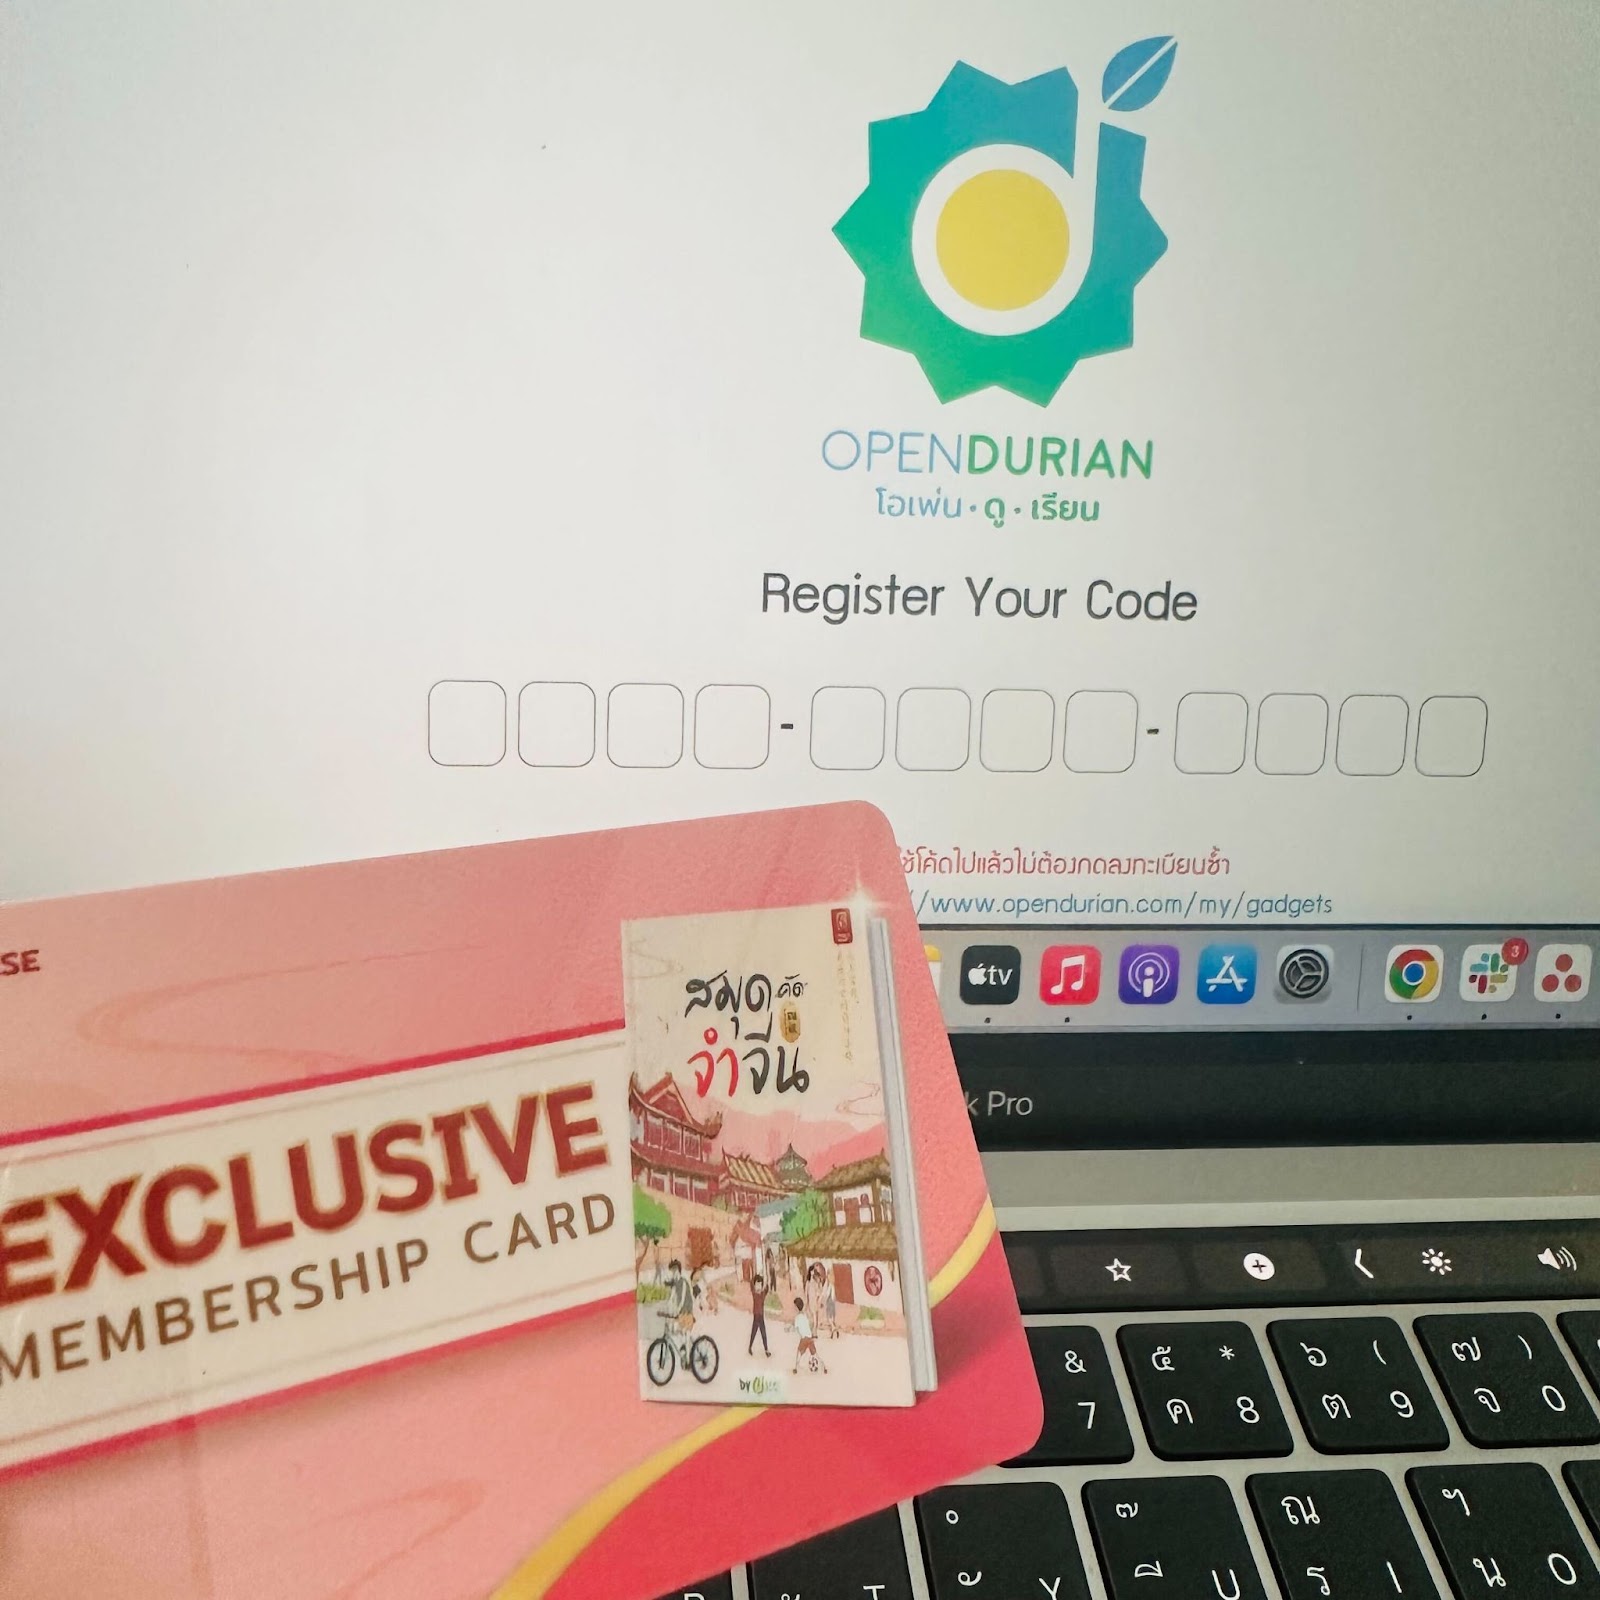 Examples HSK4 exclusive membership card and log-in page